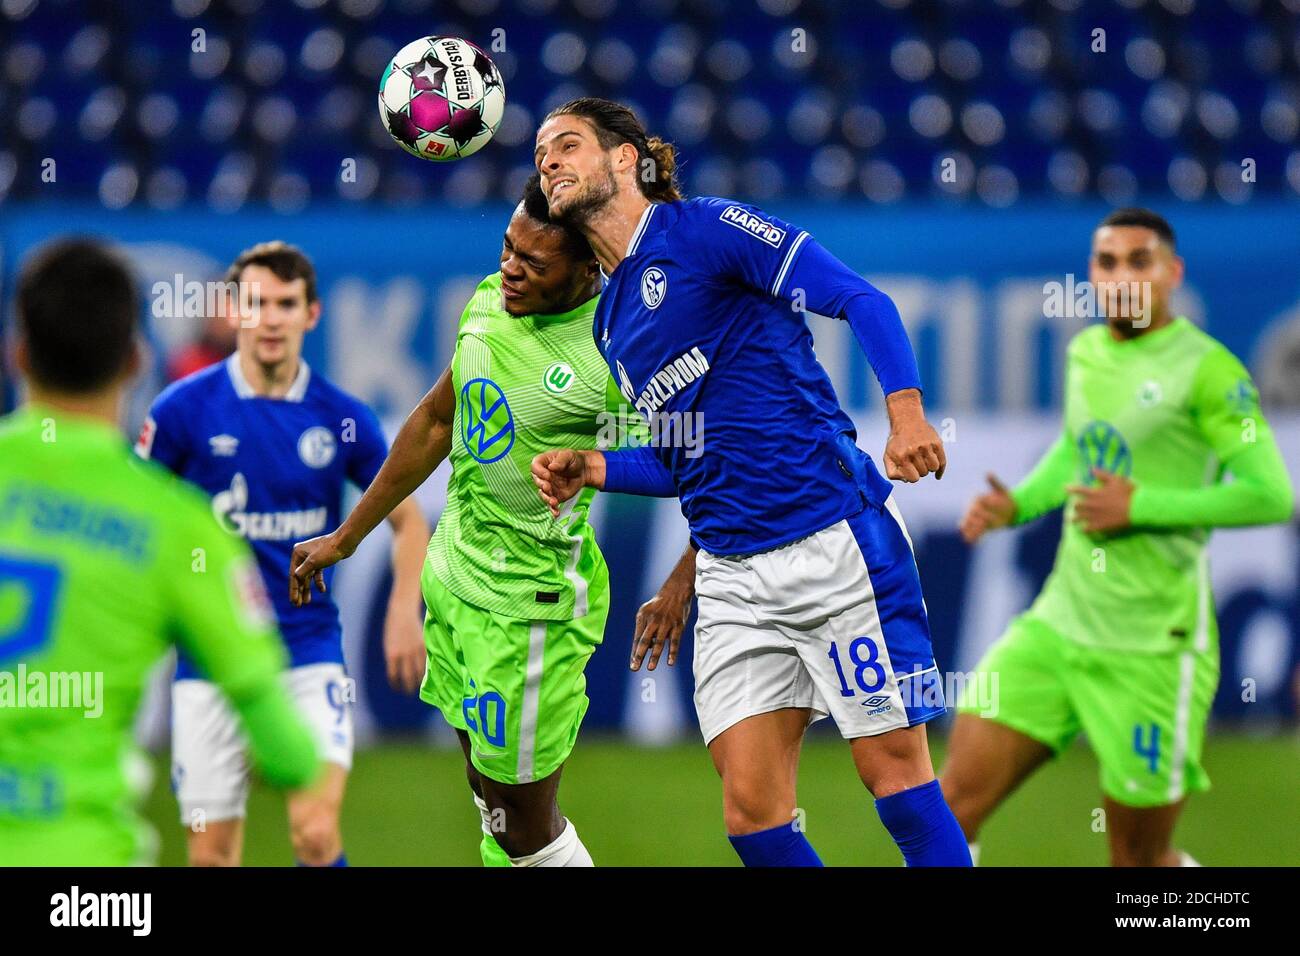 21 November 2020, North Rhine-Westphalia, Gelsenkirchen: Football: Bundesliga, 8th matchday, FC Schalke 04 - VfL Wolfsburg, Veltins Arena. Goncalo Paciencia (2nd from right) from Schalke in action against Ridle Baku (3rd from left) from Wolfsburg. Photo: Martin Meissner/Pool AP/dpa - IMPORTANT NOTE: In accordance with the regulations of the DFL Deutsche Fußball Liga and the DFB Deutscher Fußball-Bund, it is prohibited to exploit or have exploited in the stadium and/or from the game taken photographs in the form of sequence images and/or video-like photo series. Stock Photo